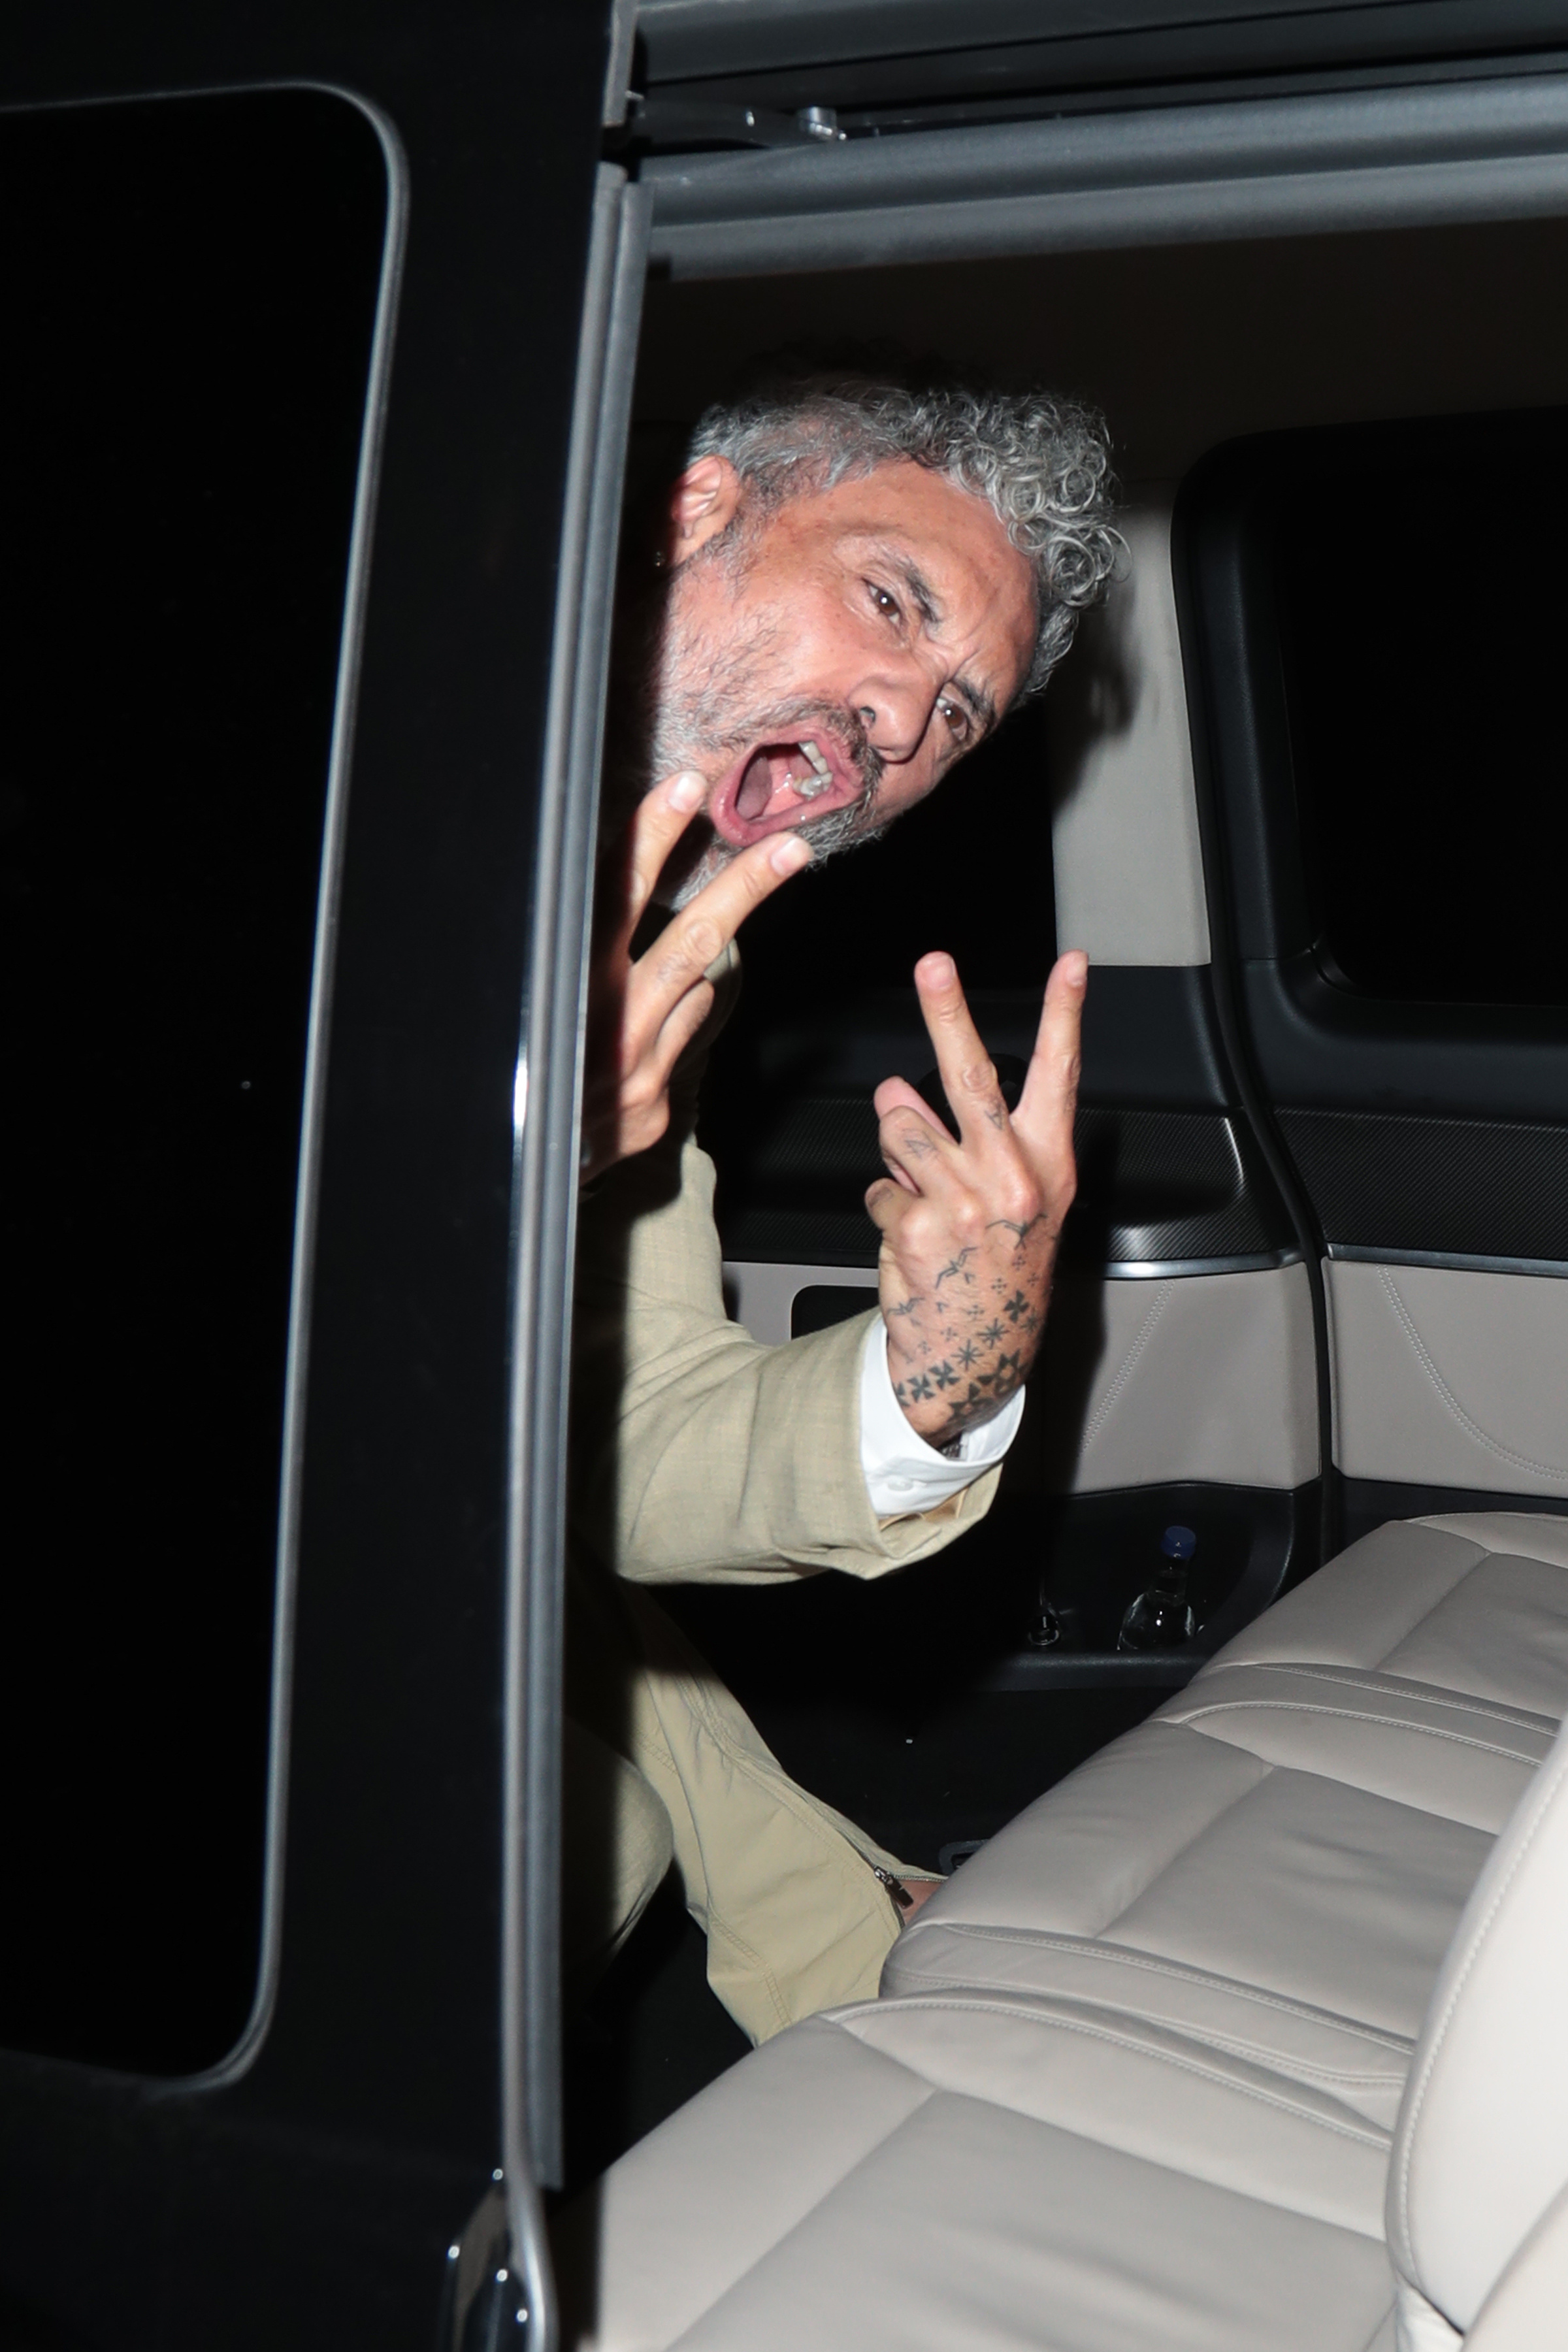 They were seen climbing into a car, with Taika making a V sign as they left